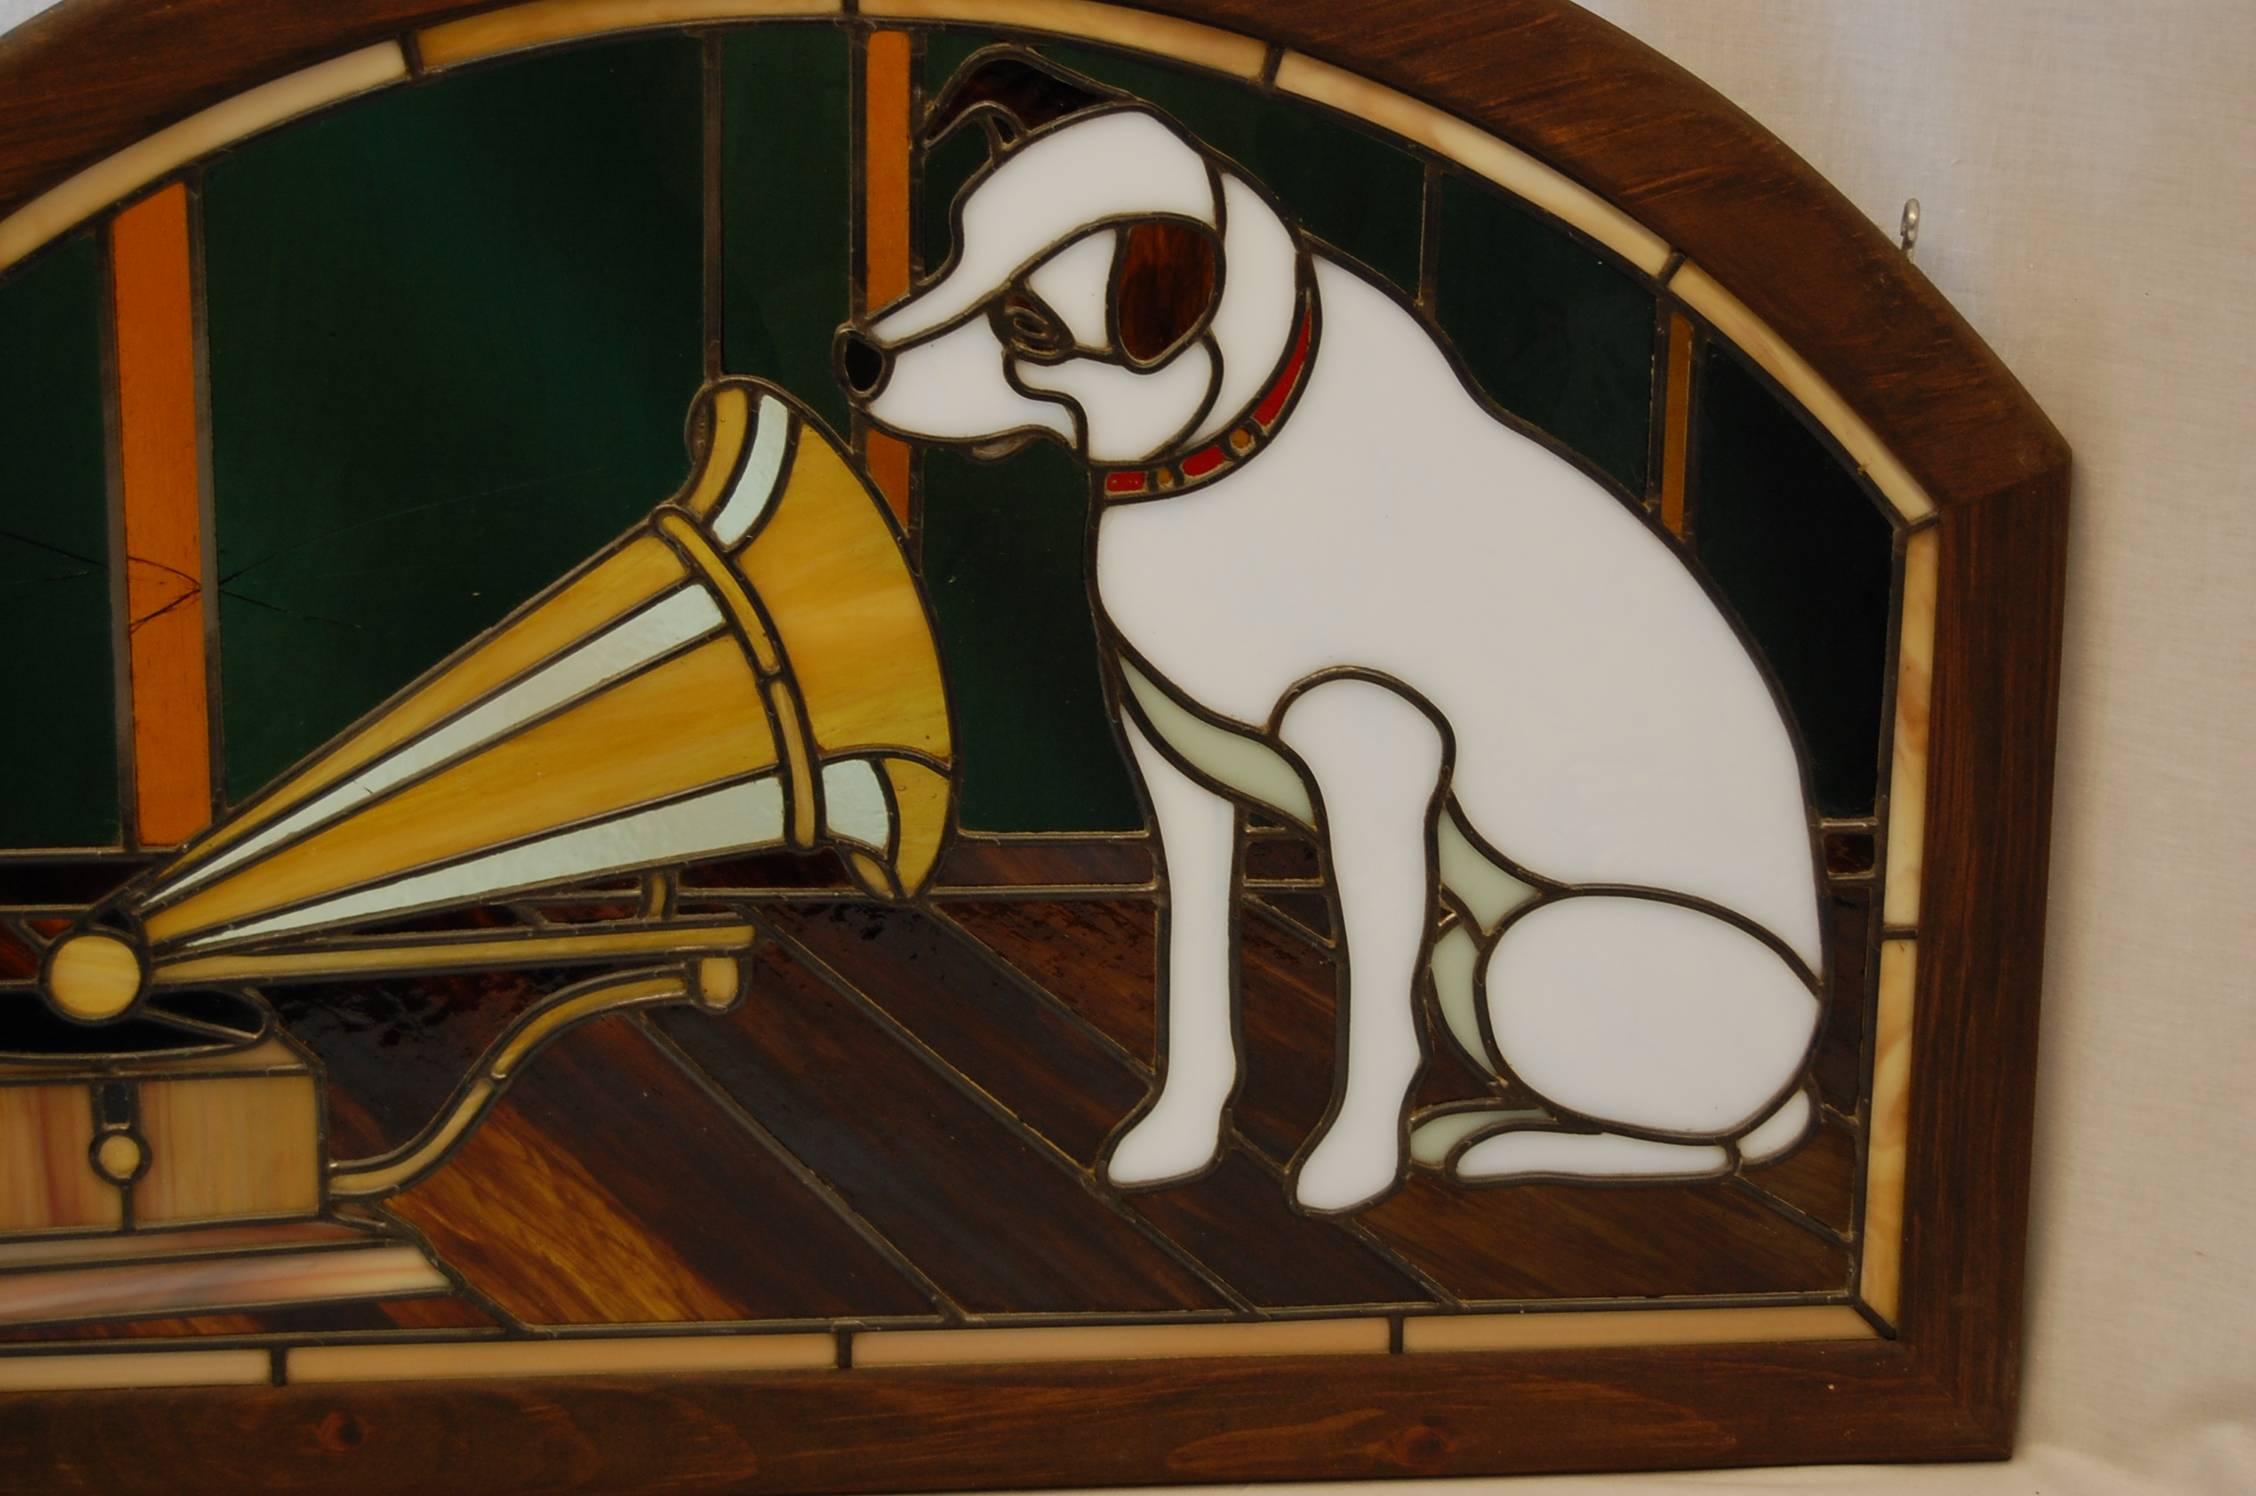 Art Deco Stained Glass Panel Featuring the RCA Dog, Nipper in Wooden Frame